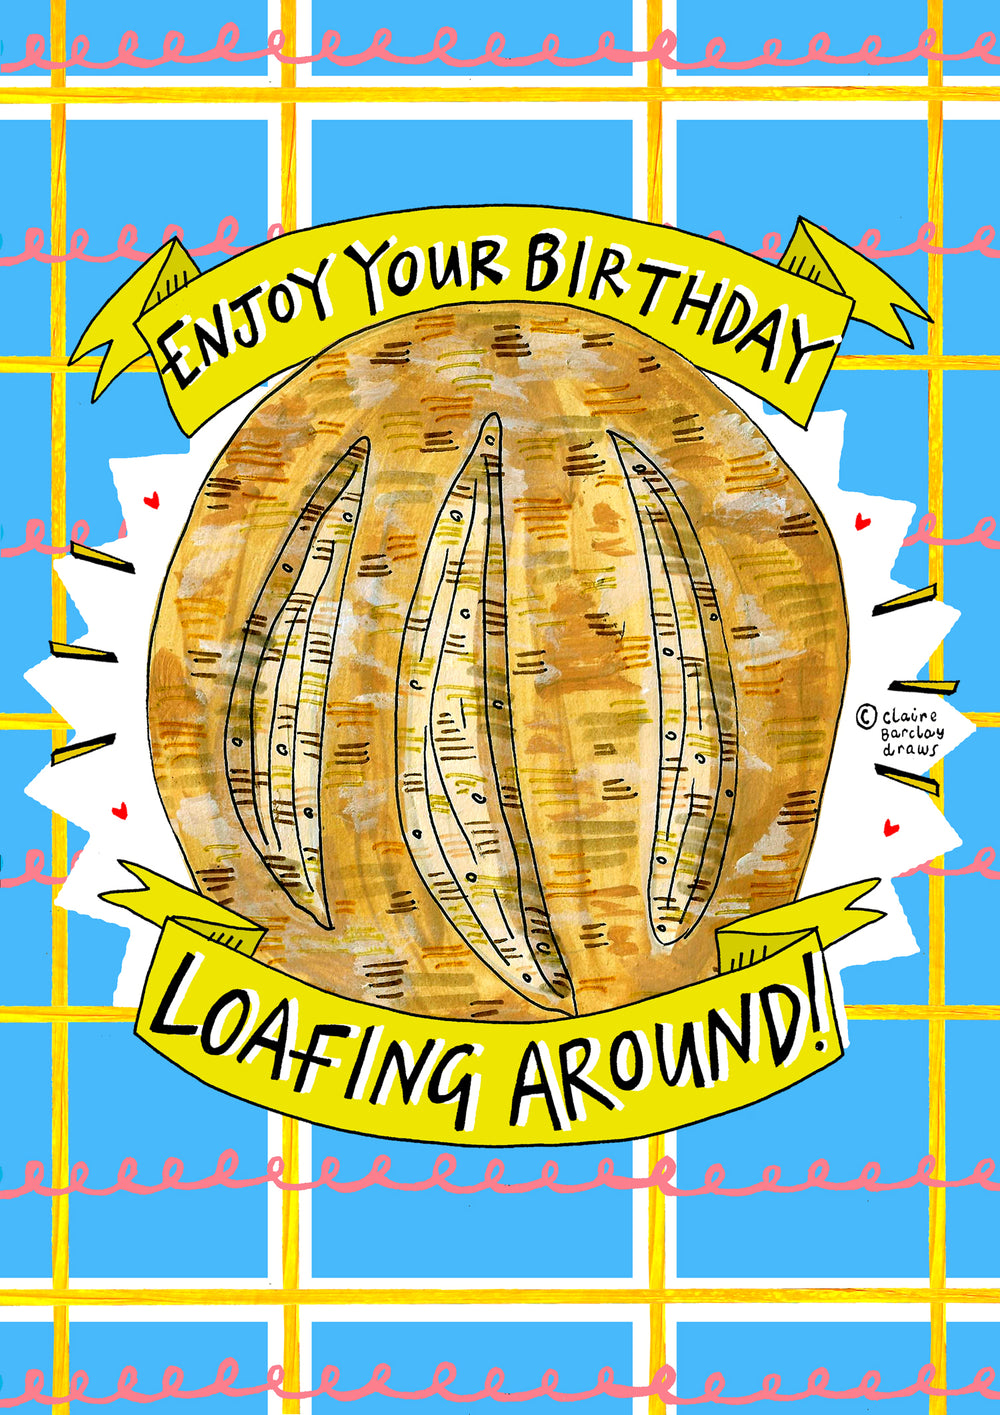 Enjoy Your Birthday LOAFING AROUND! Greetings Card